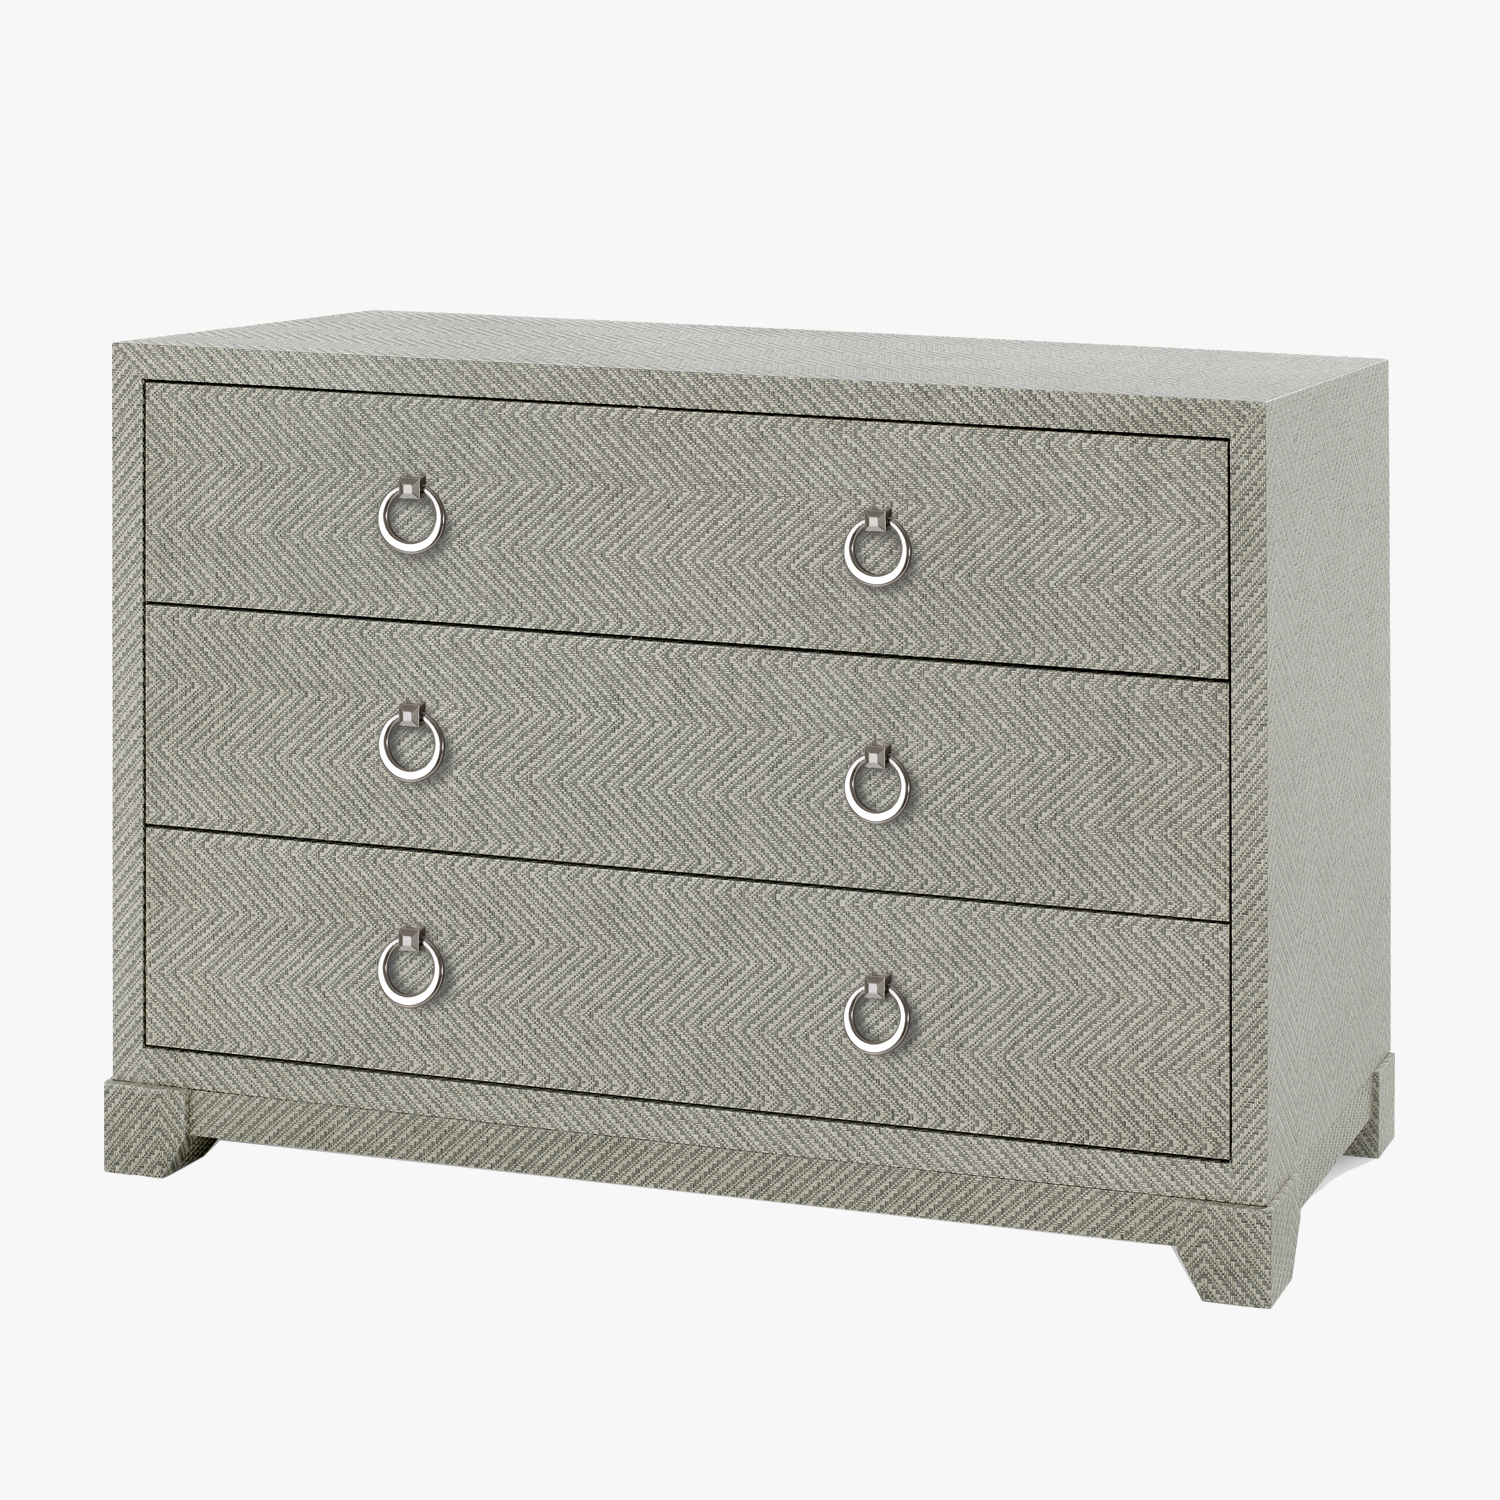 bradley grey tweed dresser bedroom furniture dear keaton hourglass accent table threshold marble and brass end carpet tile edging strip ott lamp with crystal drops round side top